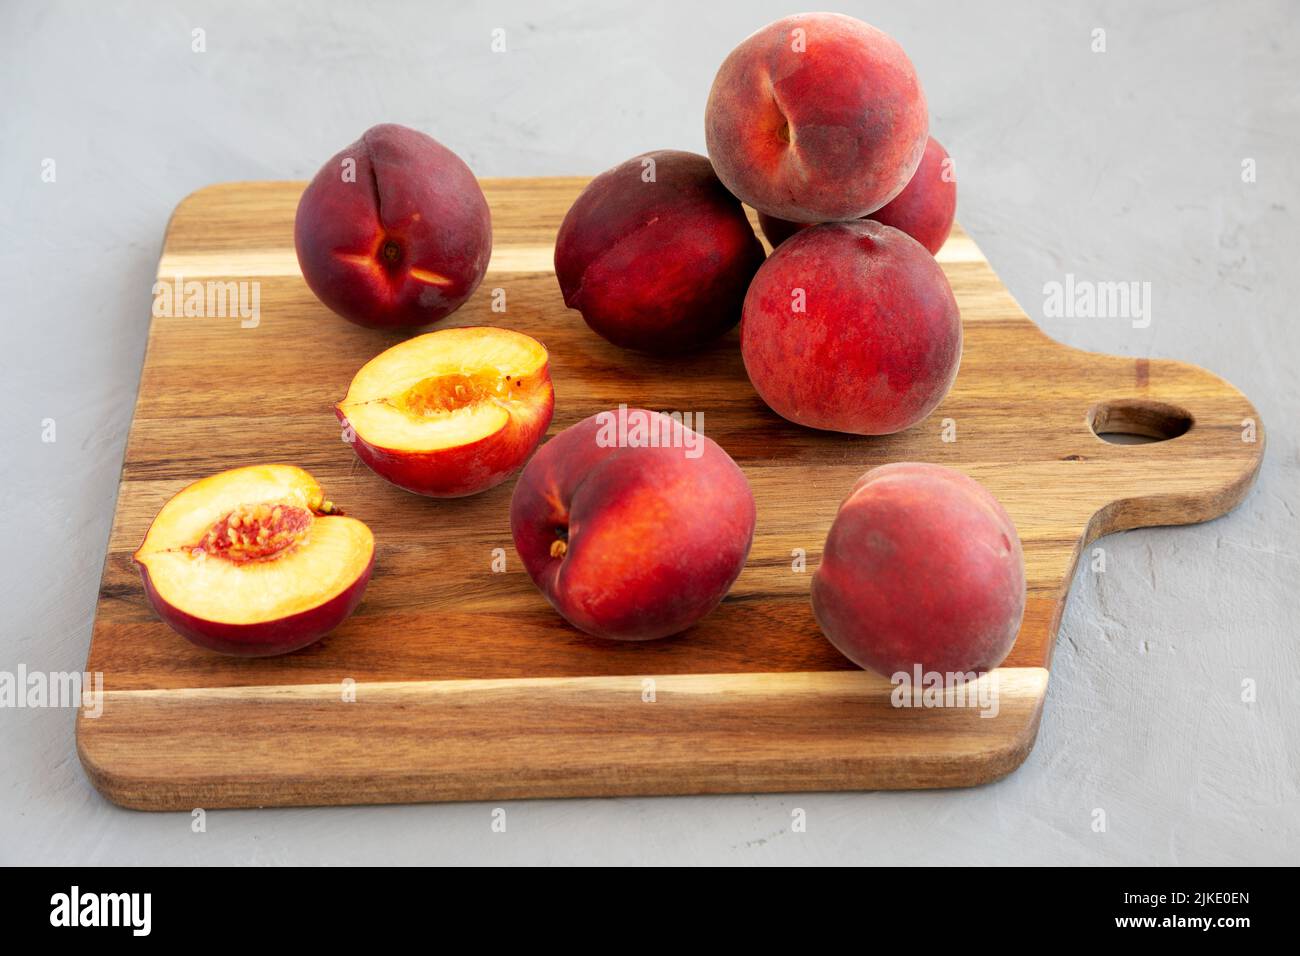 Raw Organic Yellow Peaches on a wooden board, side view. Stock Photo